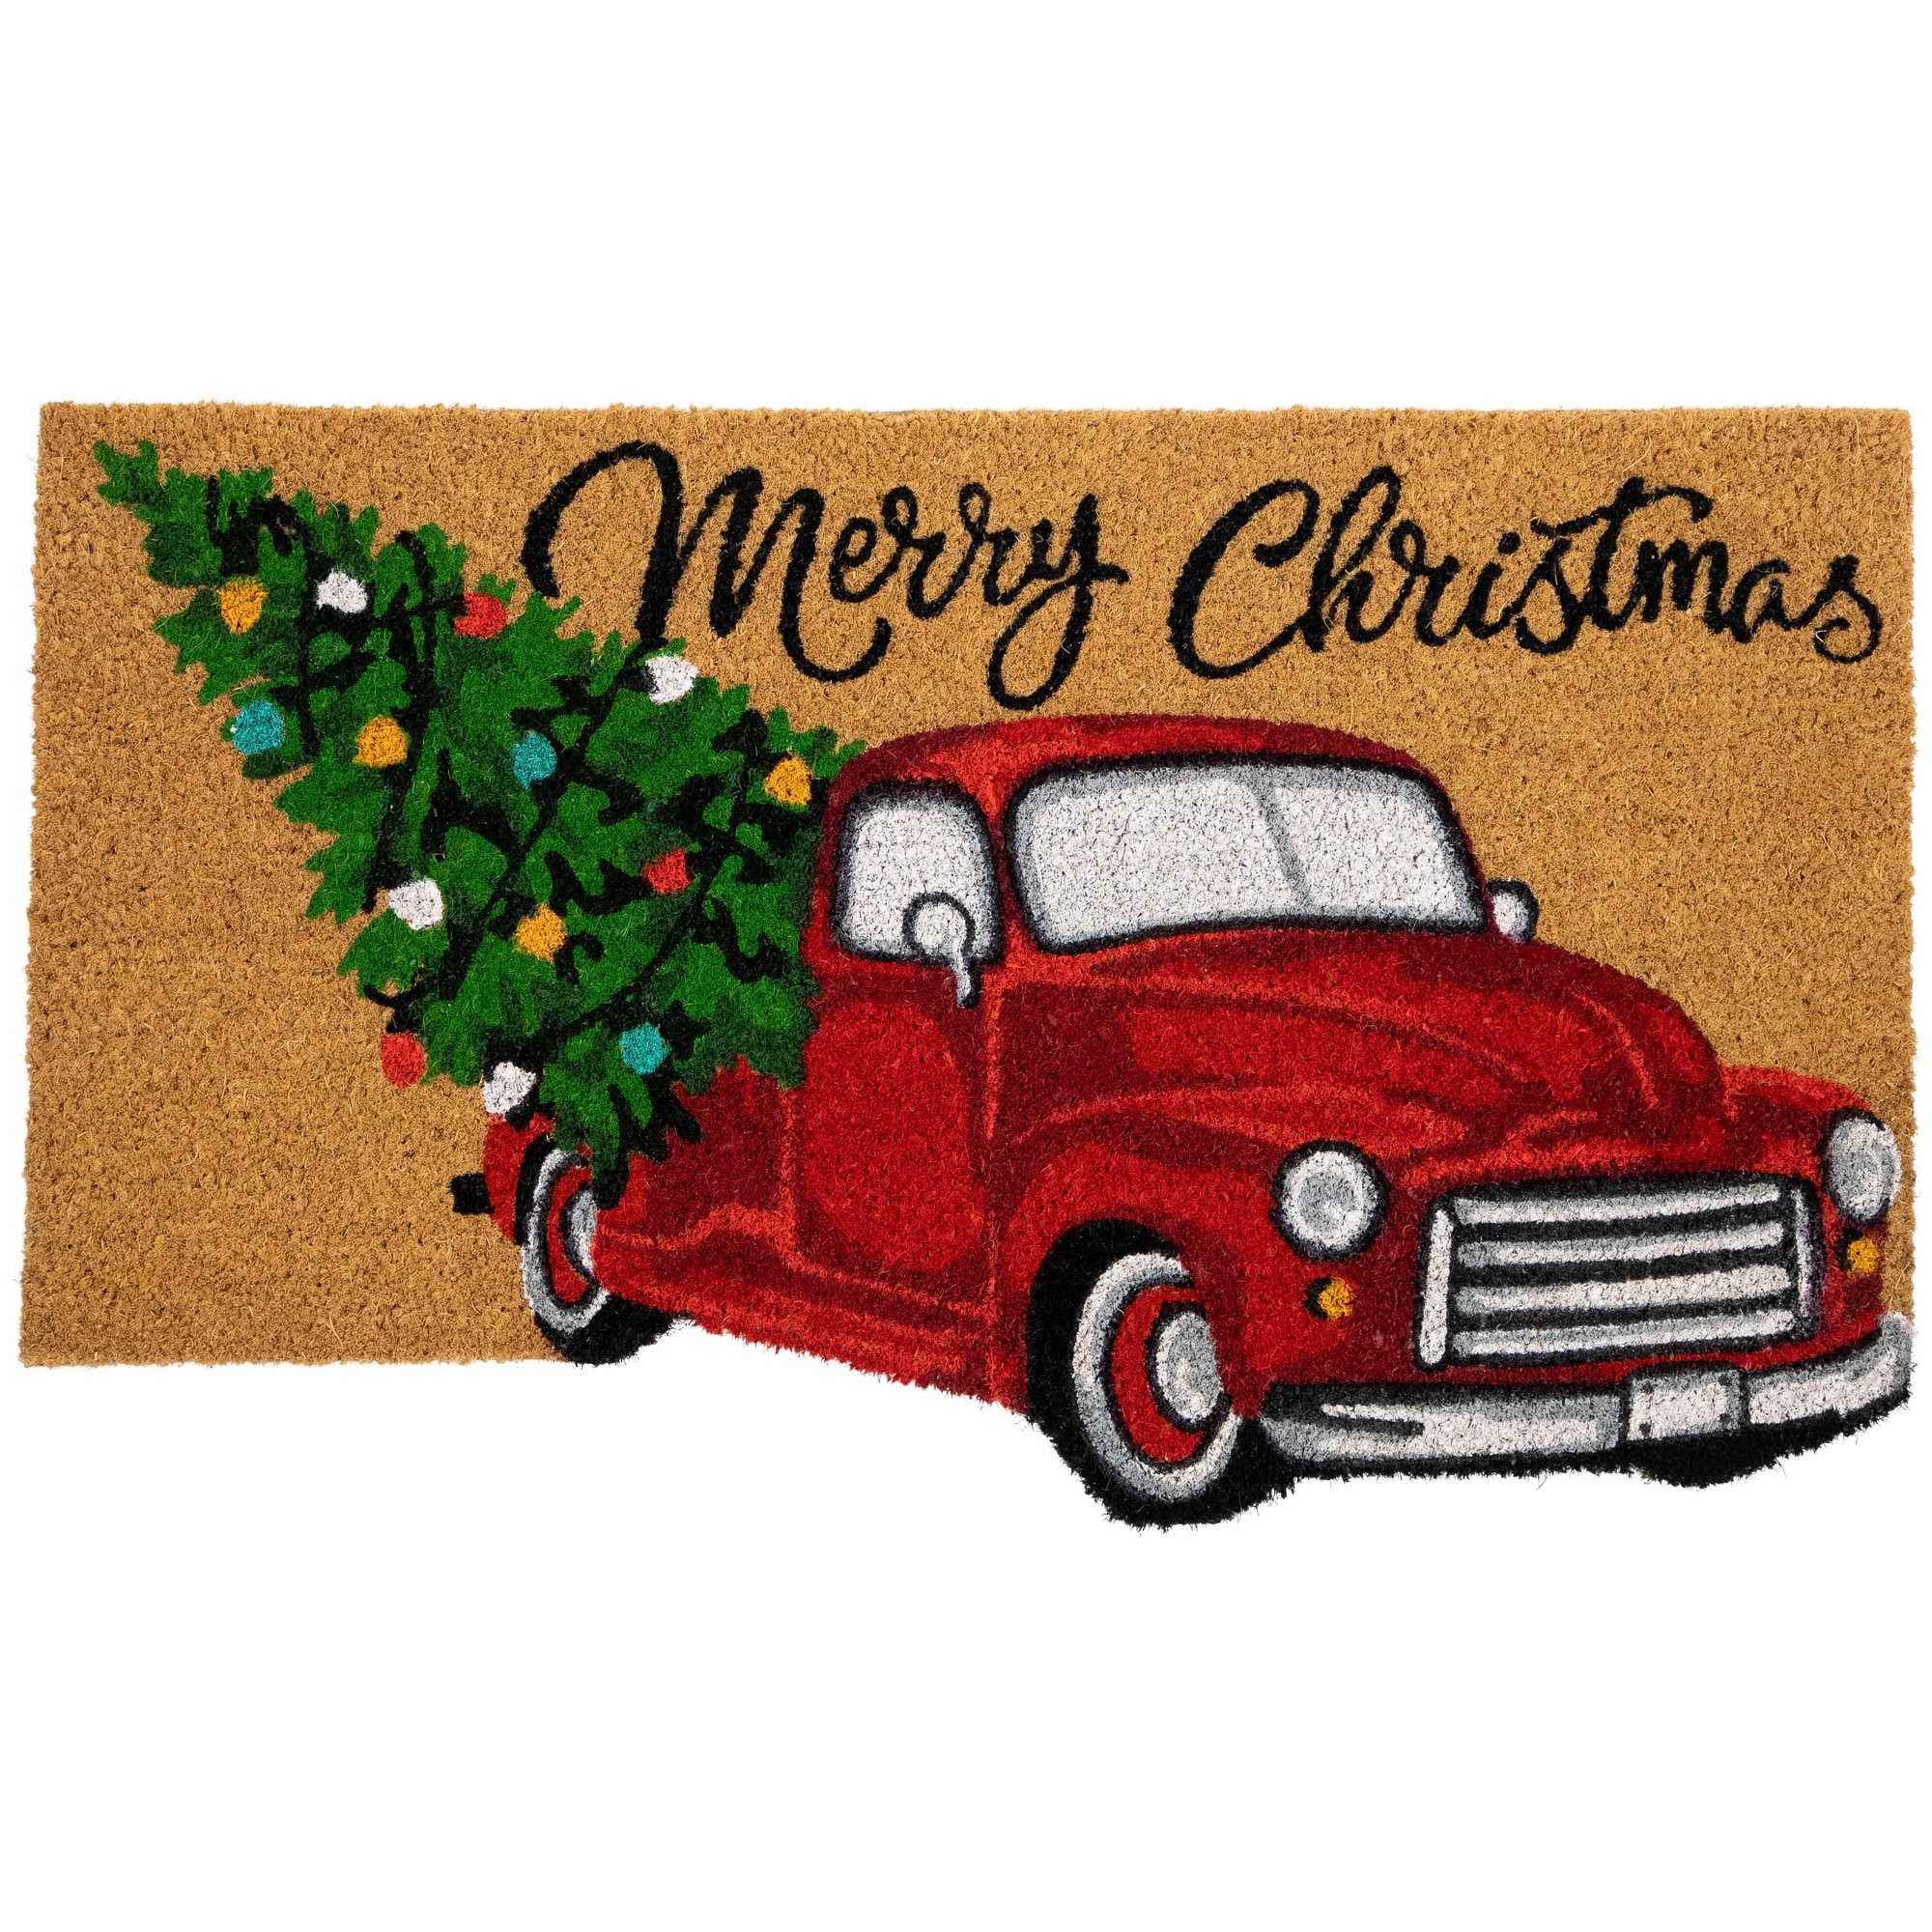 https://ak1.ostkcdn.com/images/products/is/images/direct/1e94c7e55afdd86426a743c33ec7c24e6cc9d6d8/Red-and-Green-Vintage-Truck-%22Merry-Christmas%22-Outdoor-Natural-Coir-Doormat-18%22-x-30%22.jpg